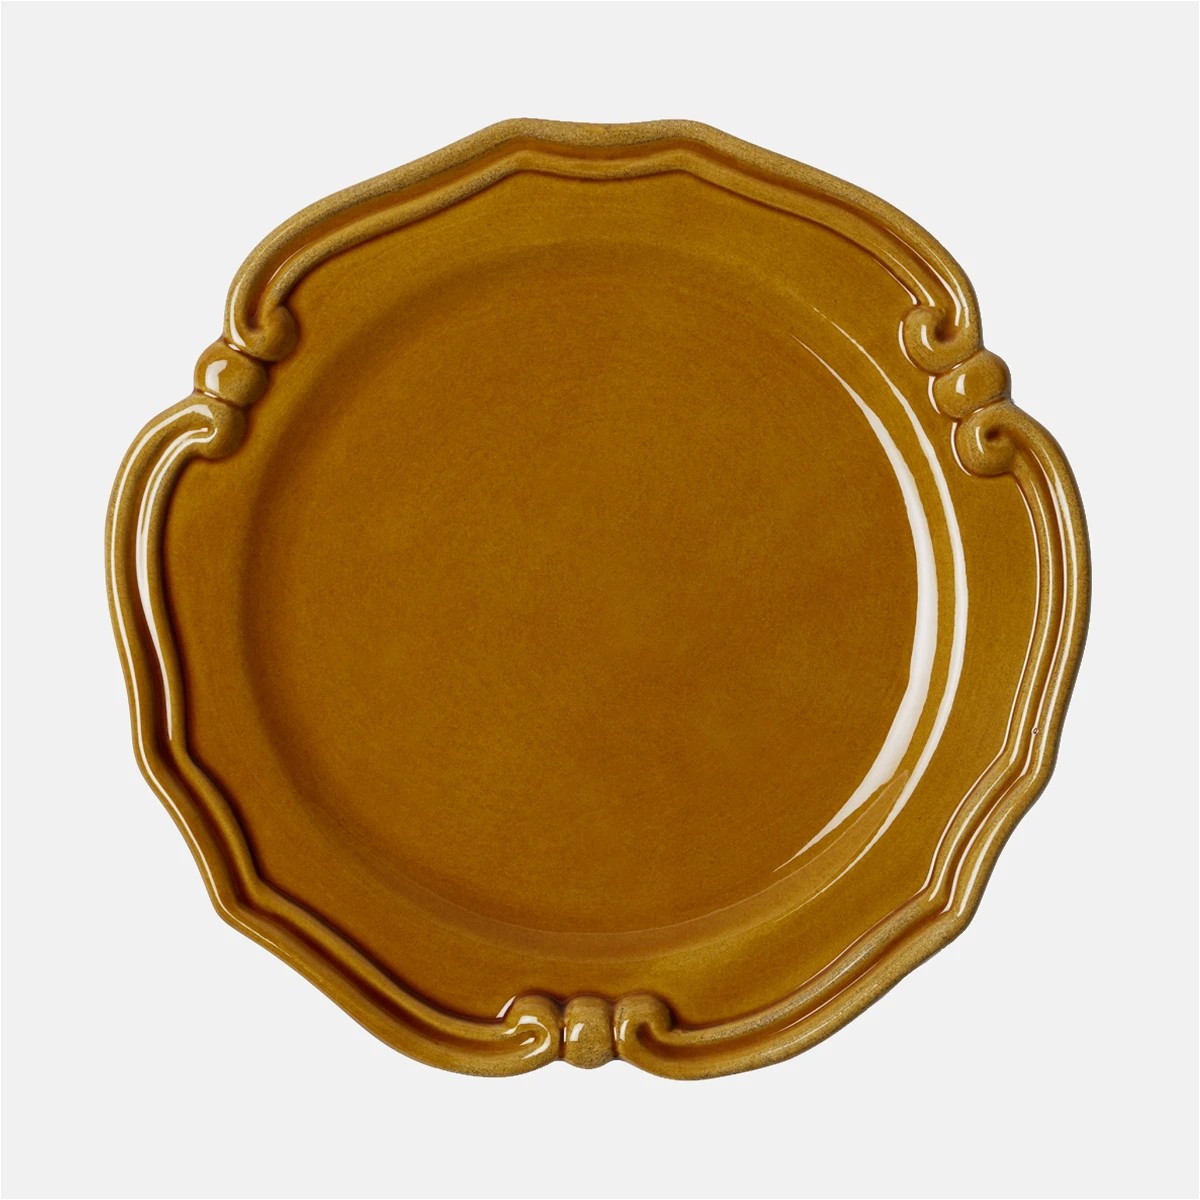 The image of an French Dinner Plate product